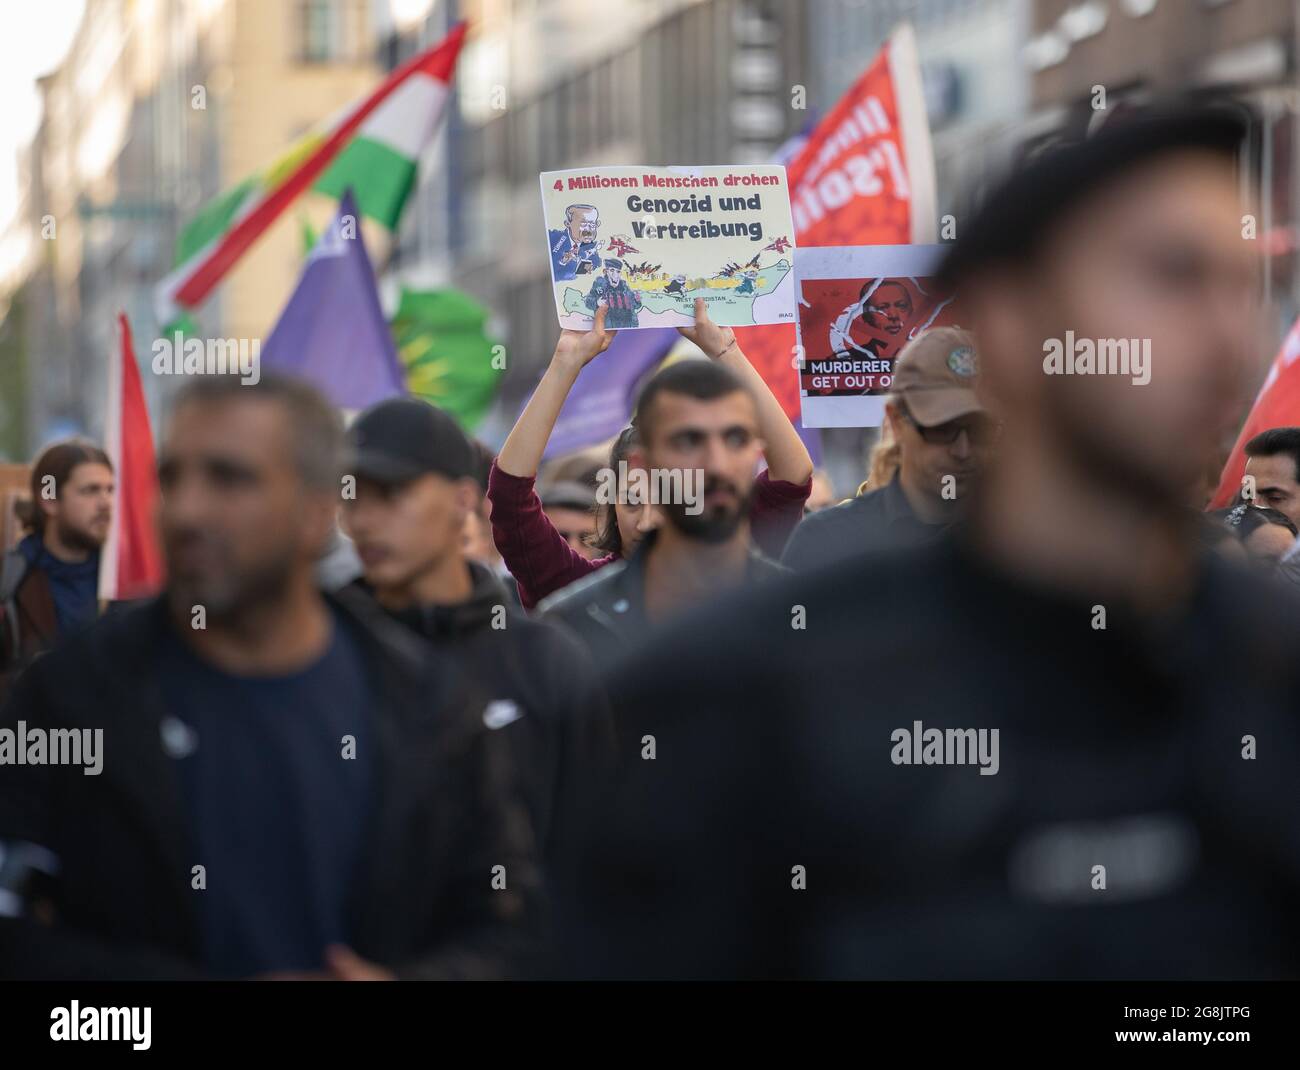 Munich, Germany. 26th Oct, 2019. On 26. October 2016 around 800 people joined a demonstration in solidarity of the Kurdish people in Syria, who are being attacked by the Turkish military. (Photo by Alexander Pohl/Sipa USA) Credit: Sipa USA/Alamy Live News Stock Photo